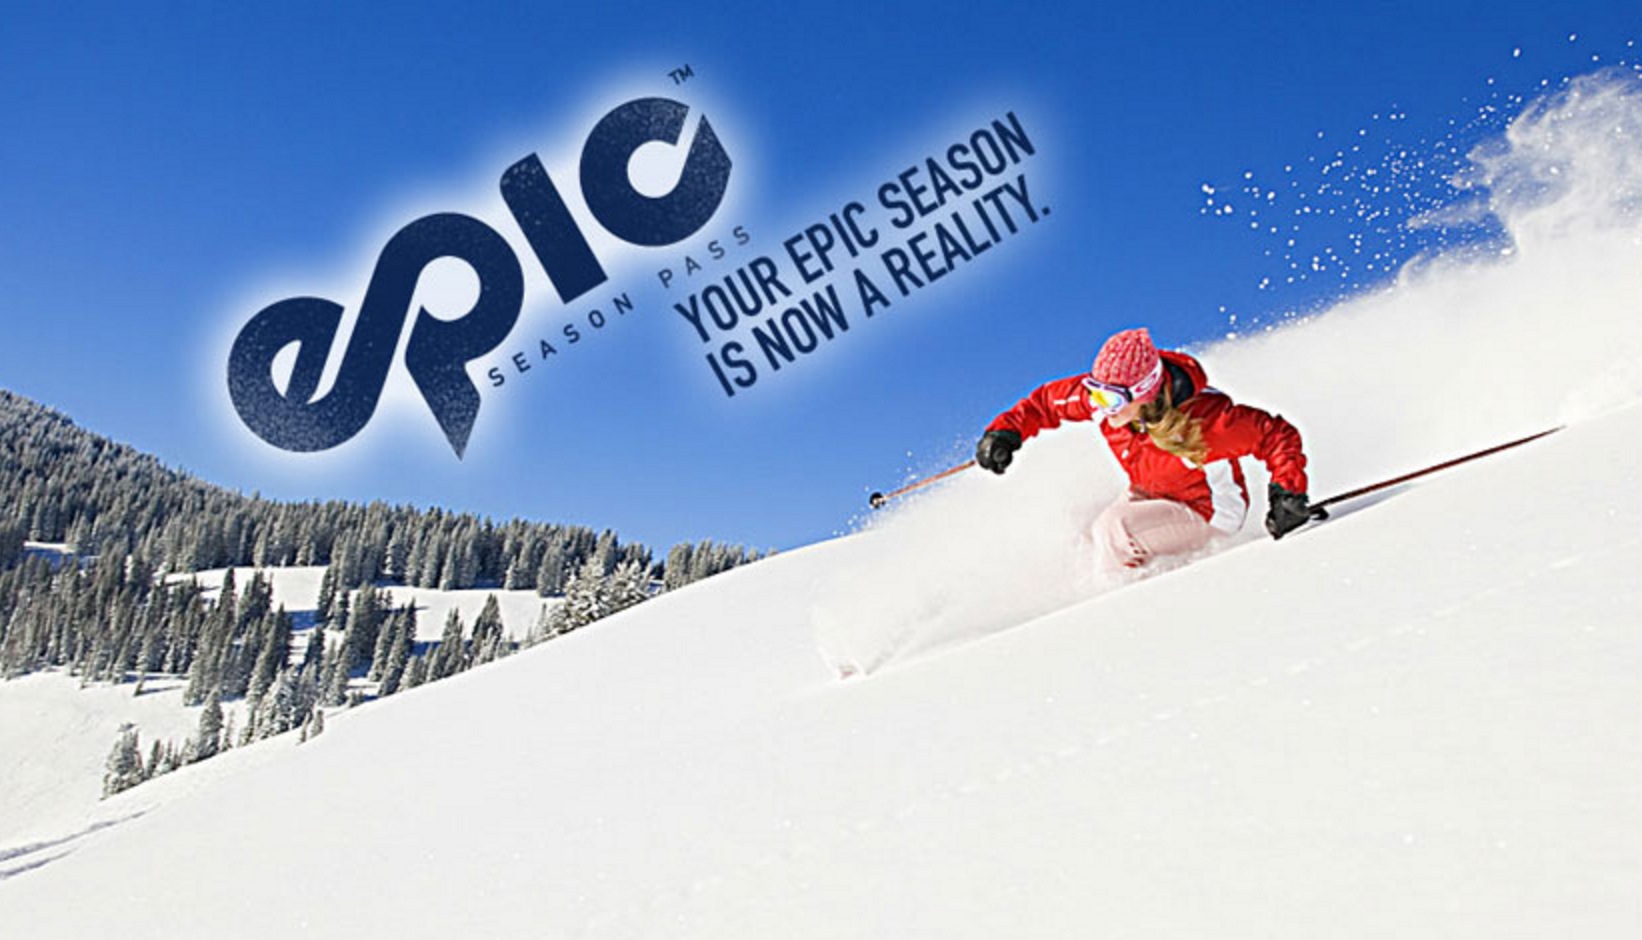 epic ski pass reservations